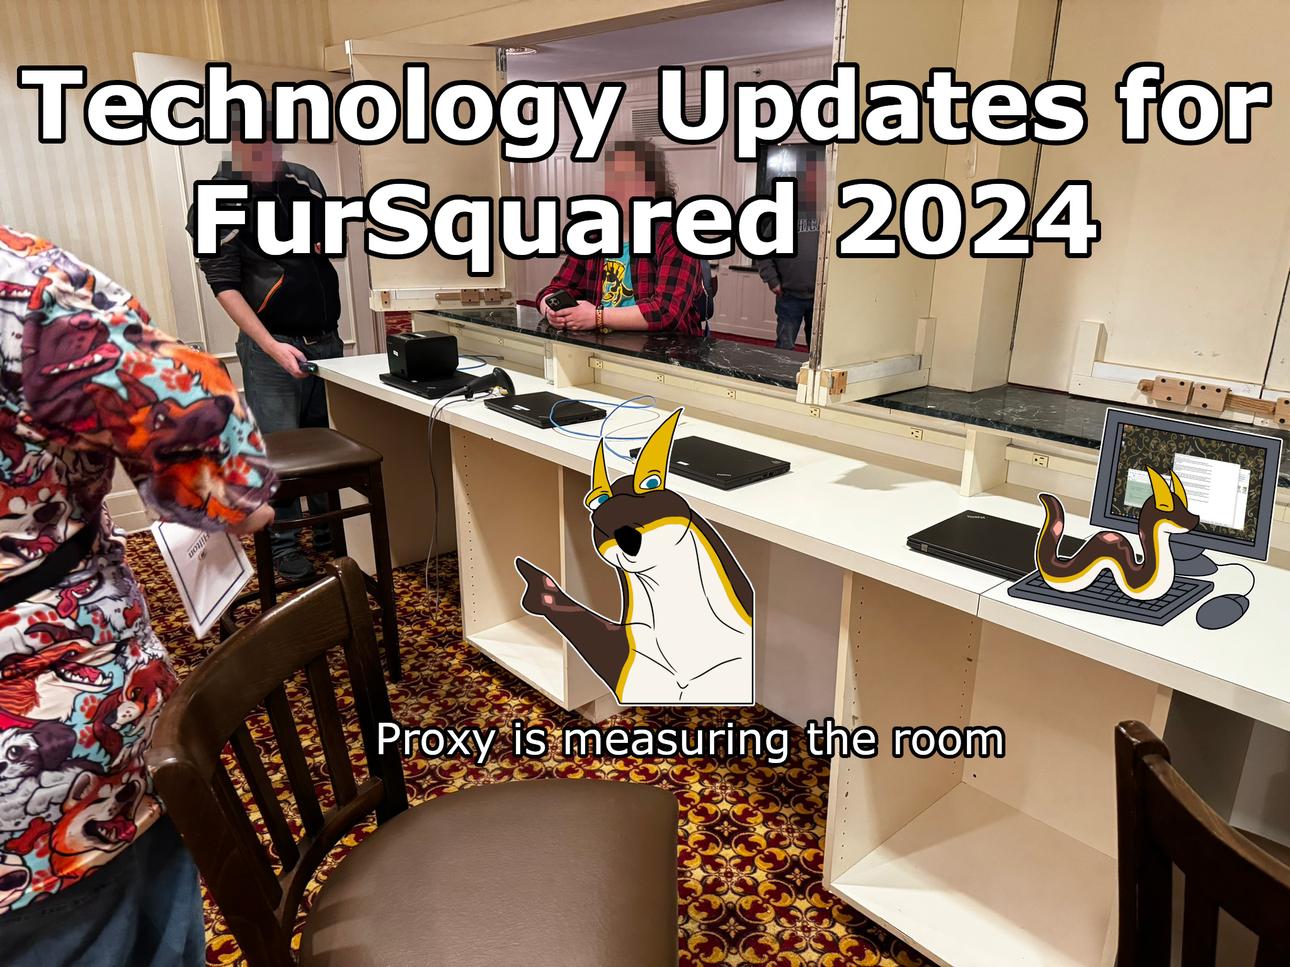 Technology updates for 2024, a person is measuring the room with a laser device.